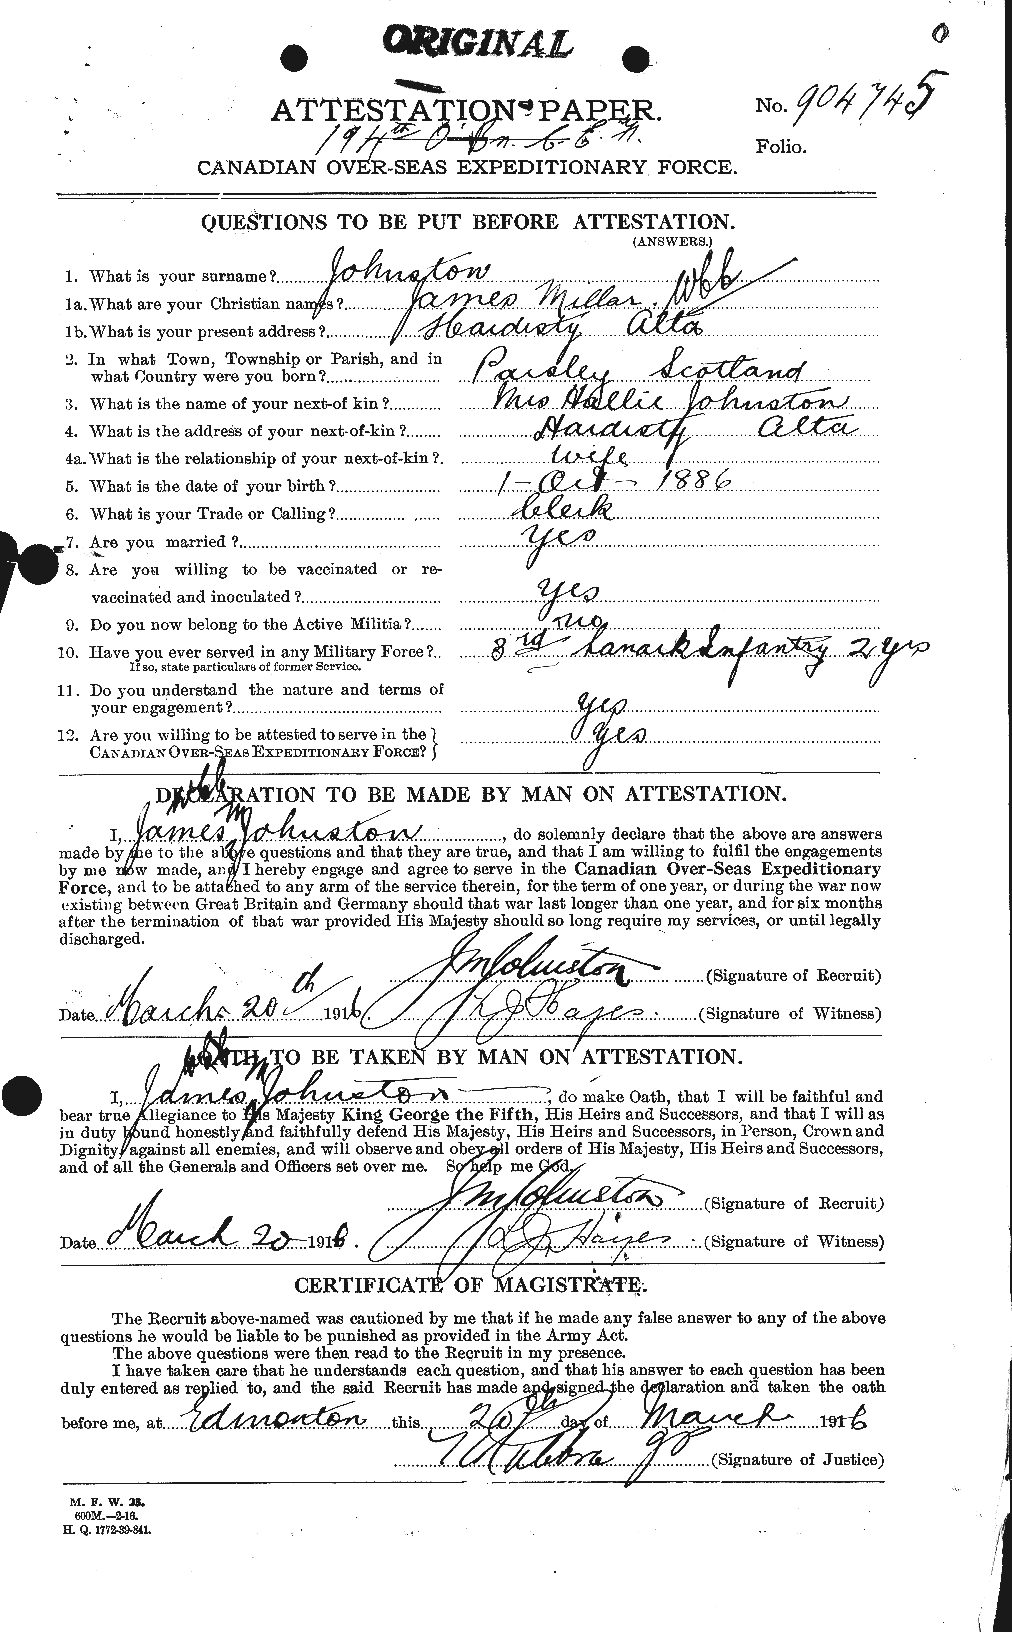 Personnel Records of the First World War - CEF 422744a